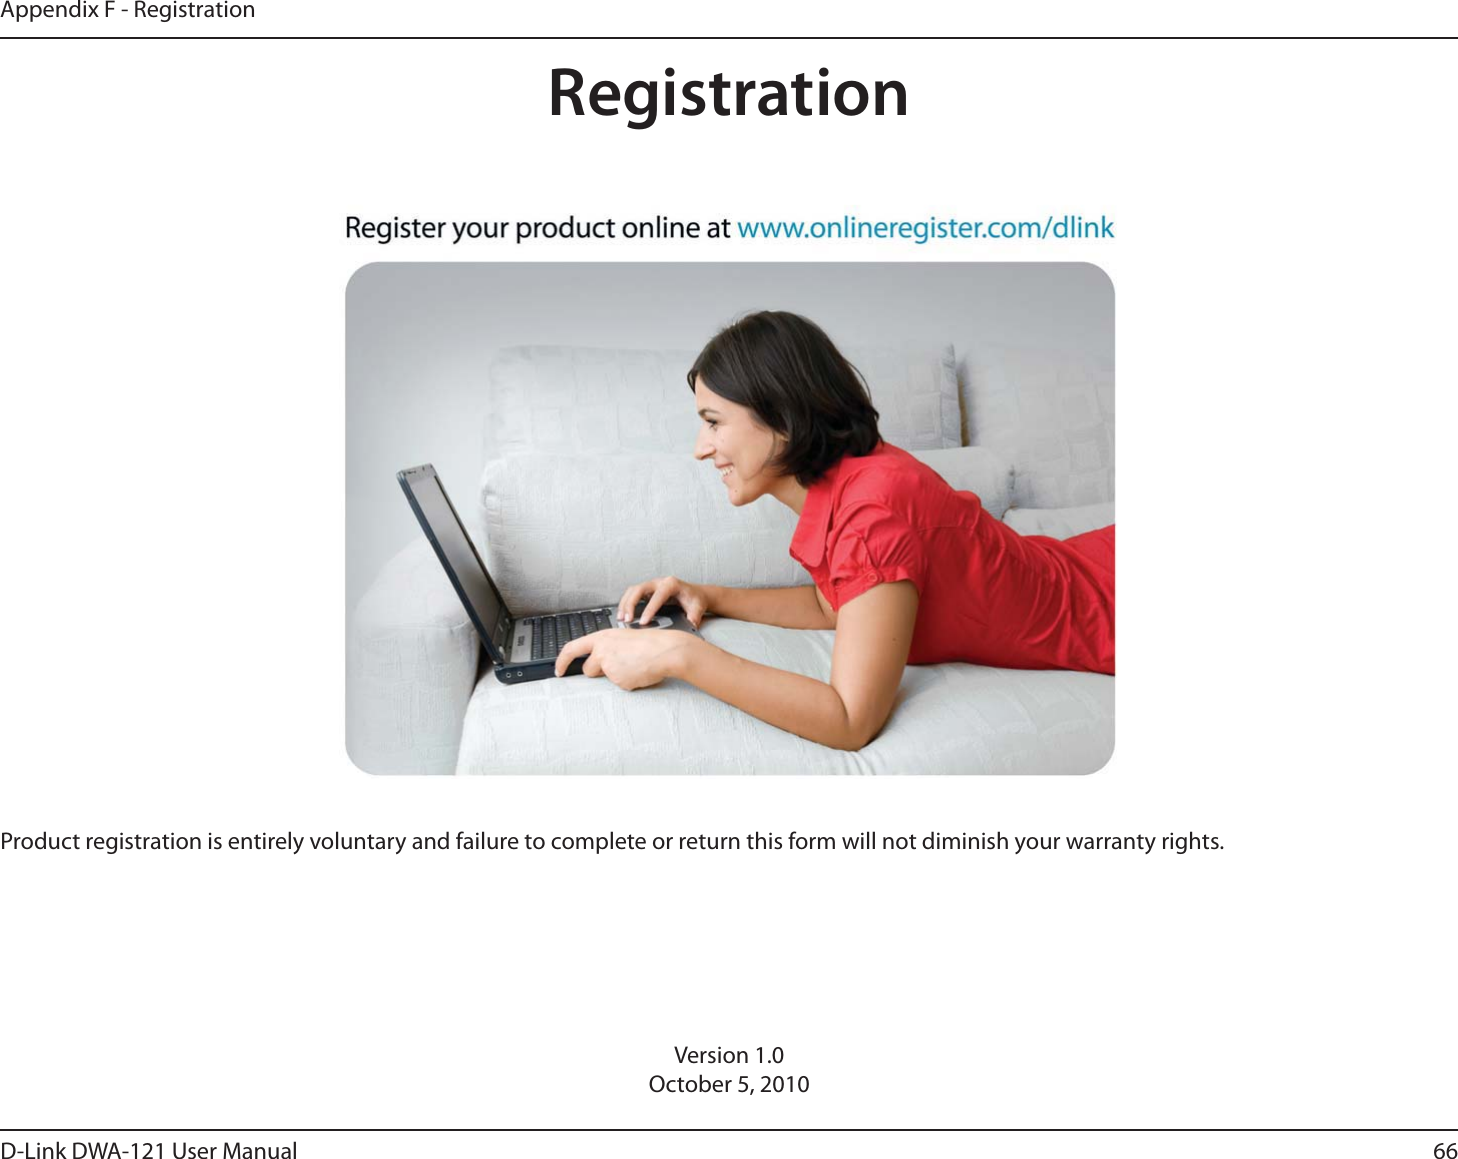 66D-Link DWA-121 User ManualAppendix F - RegistrationVersion 1.0October 5, 2010 Product registration is entirely voluntary and failure to complete or return this form will not diminish your warranty rights.Registration